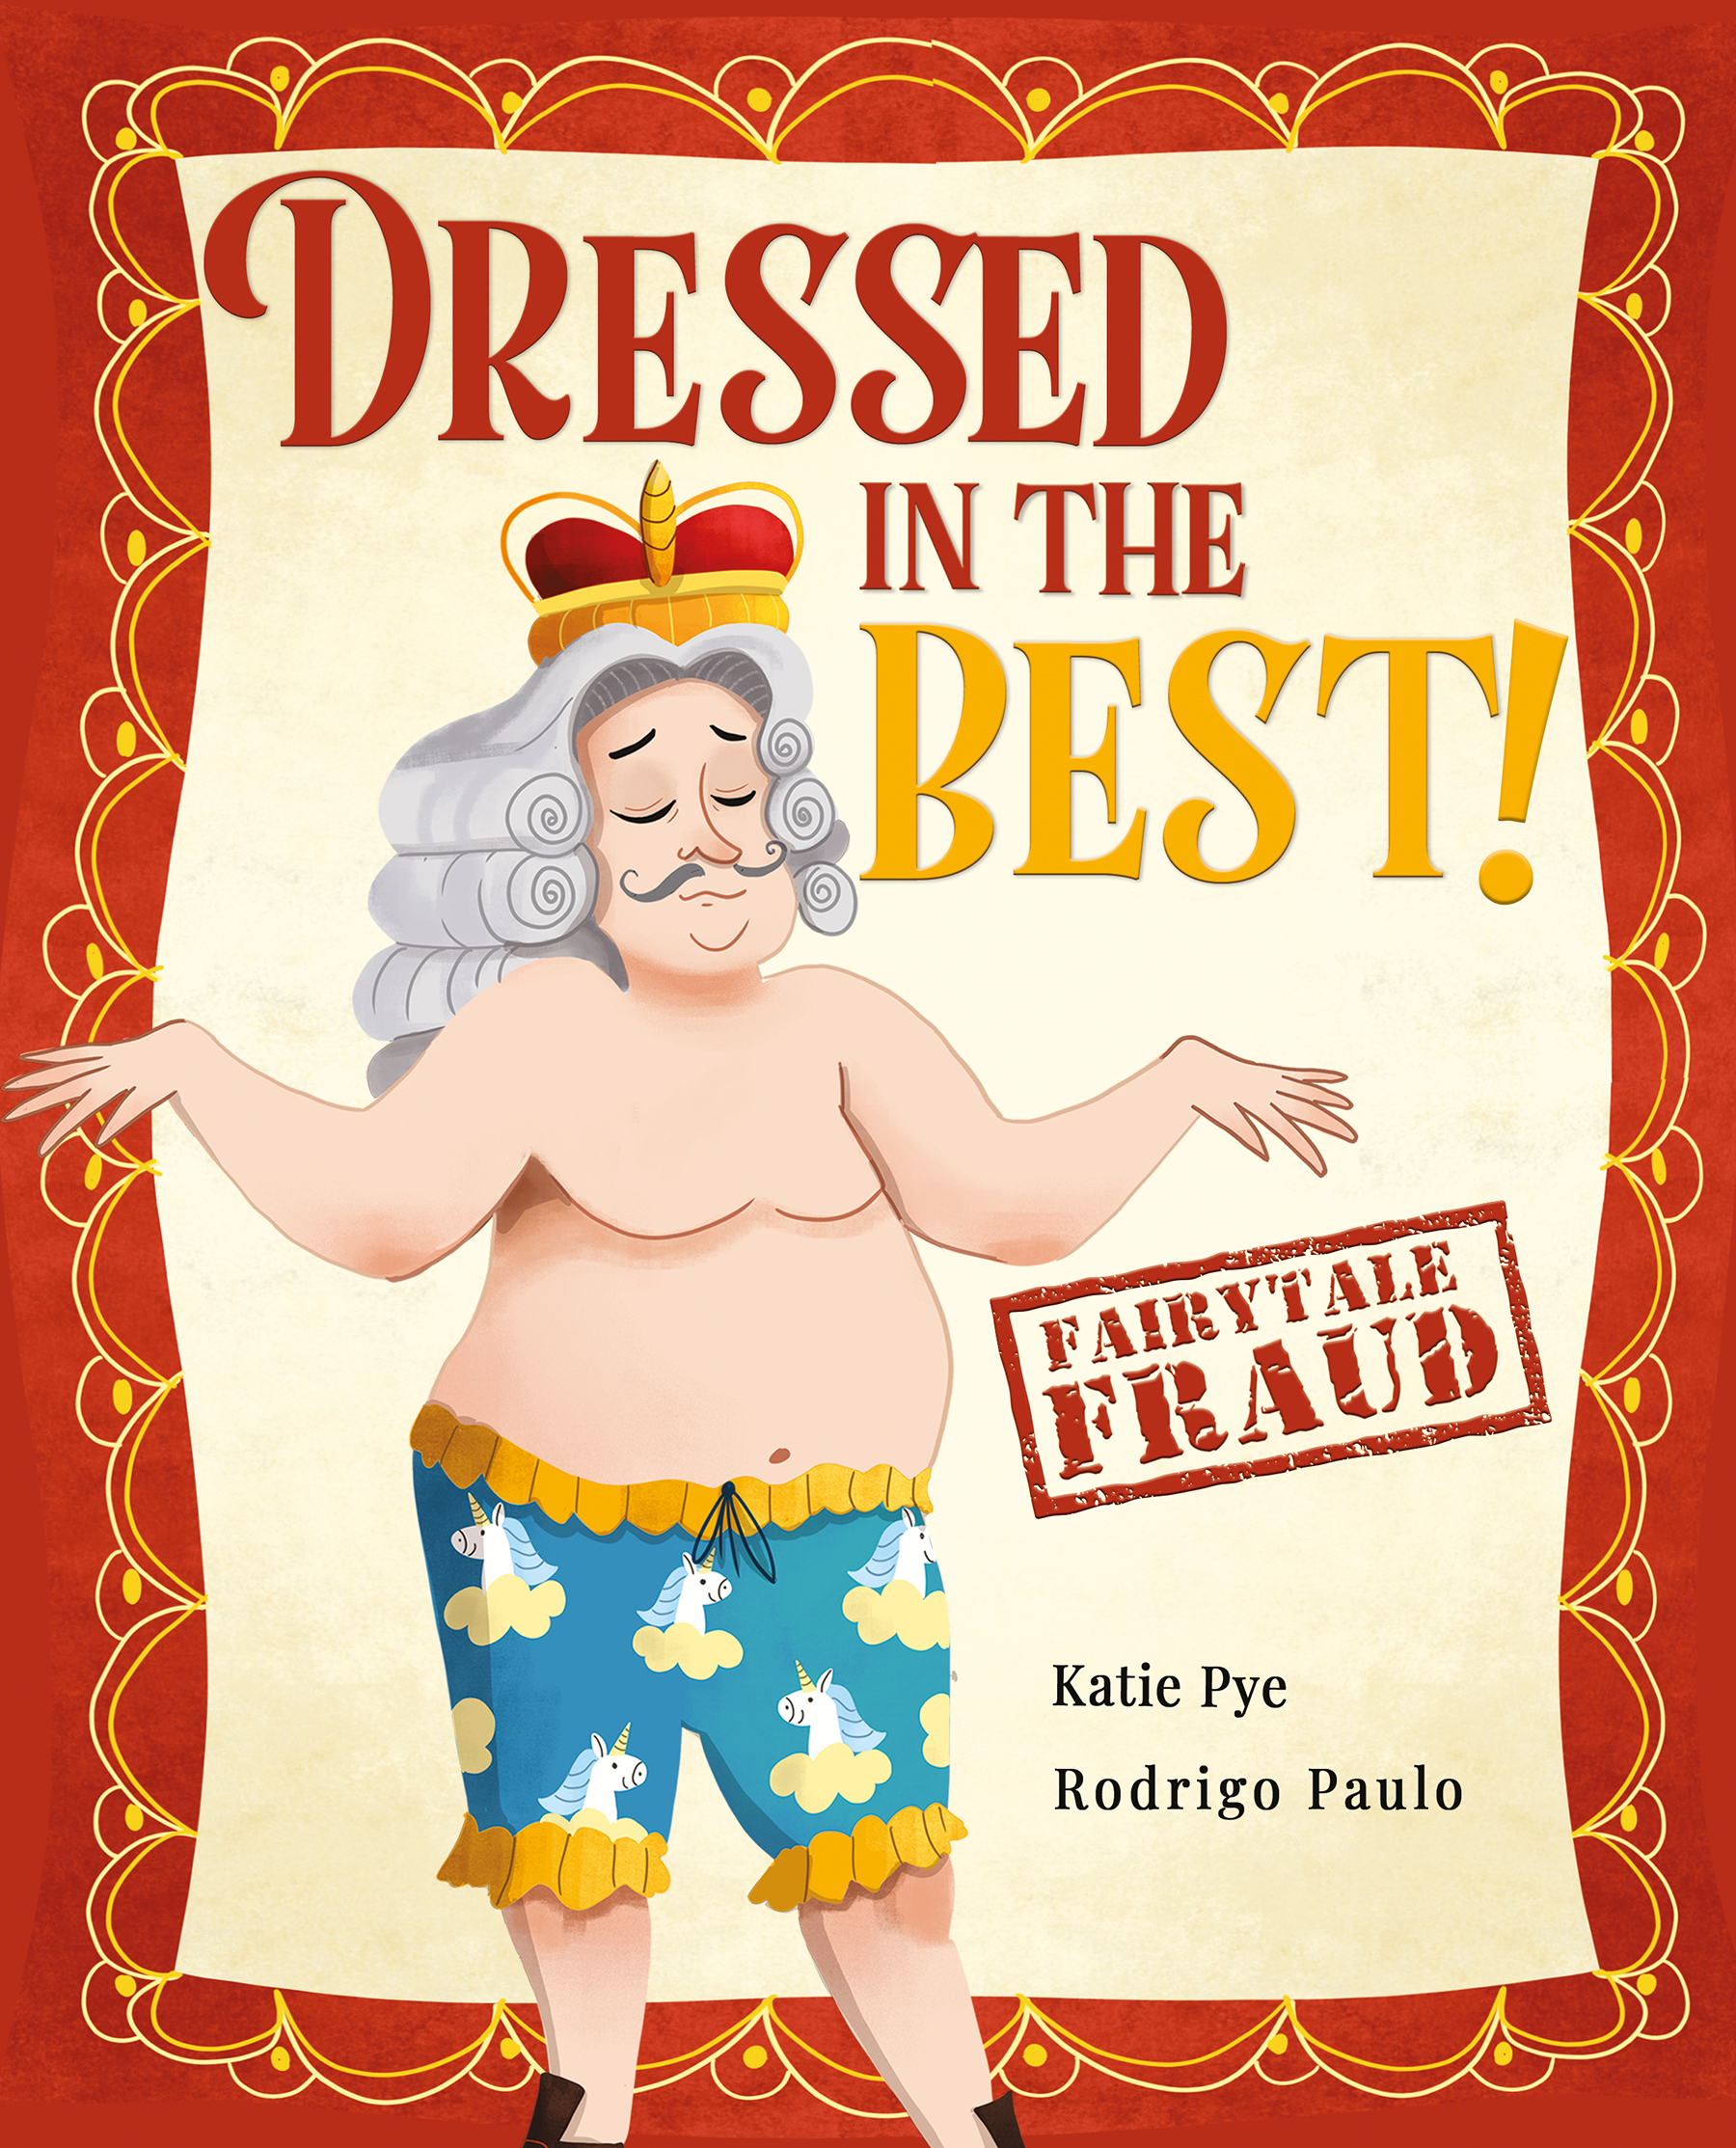 FREE: Dressed in the Best! by Katie Pye